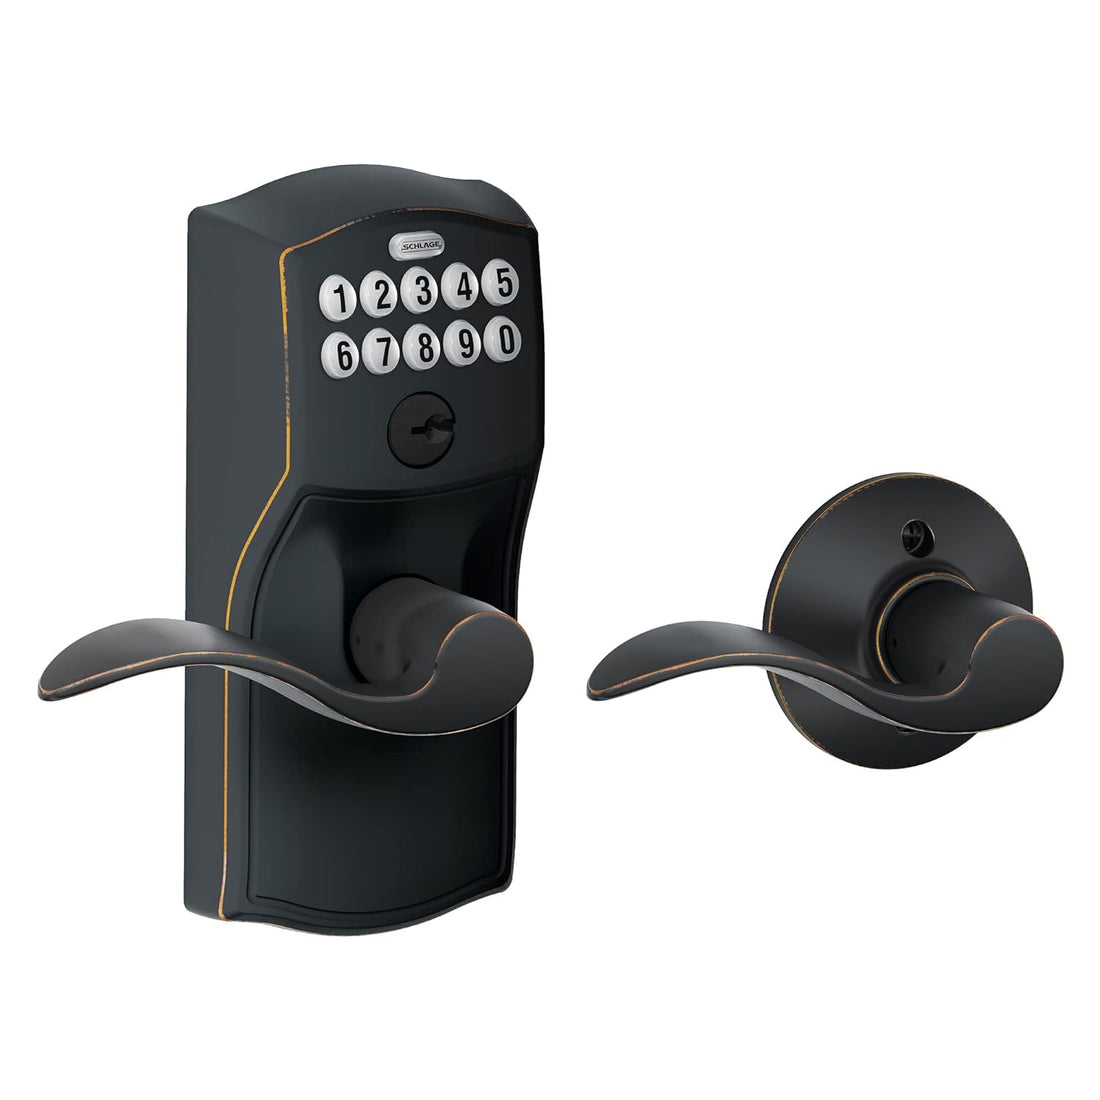 Schlage FE575 CAM 716 Acc Camelot Keypad Entry with Auto-Lock and Accent Levers, Aged Bronze